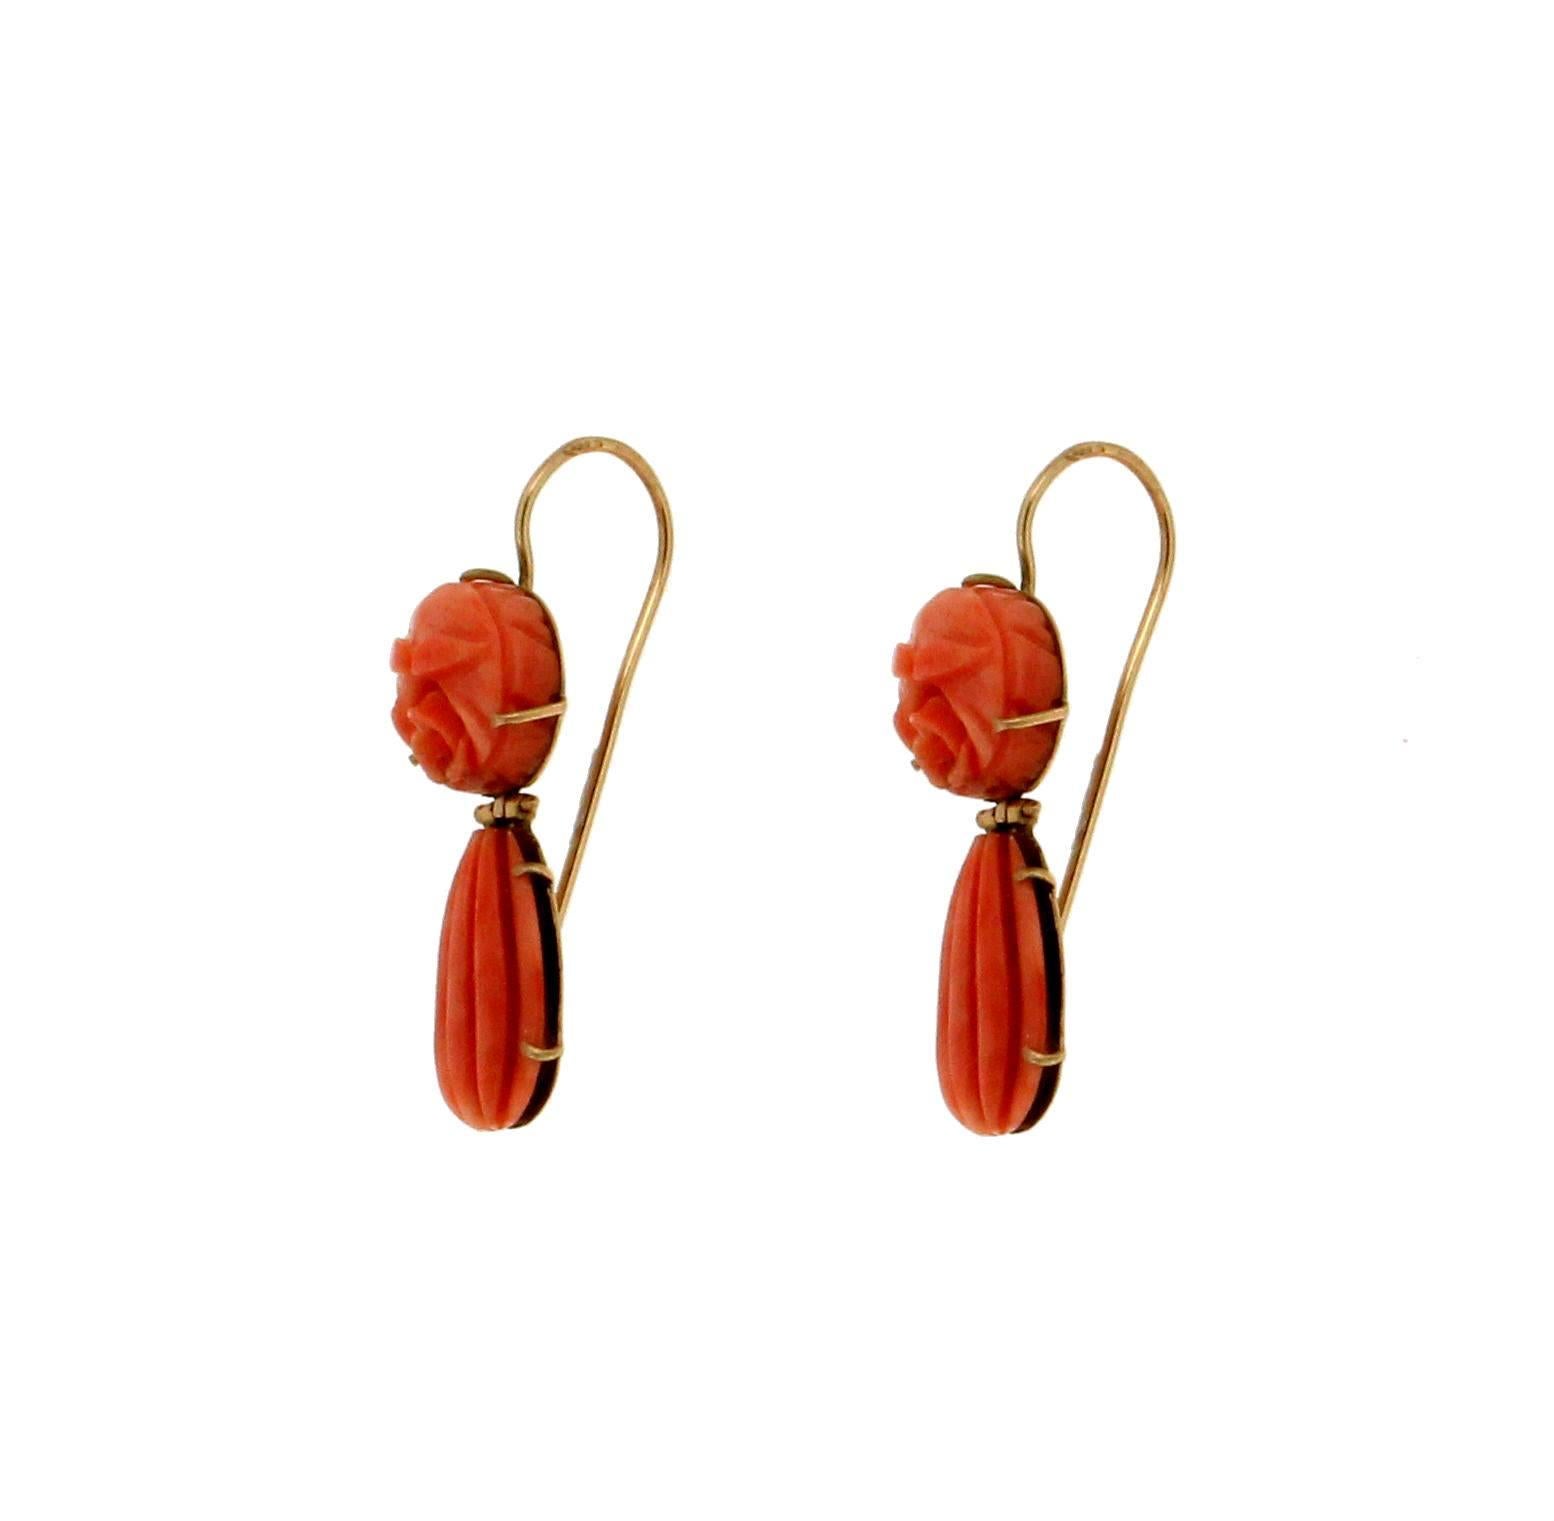 Coral From Sicily Yellow Gold 14 Carat Drop Earrings

Earrings weight 5.30 grams